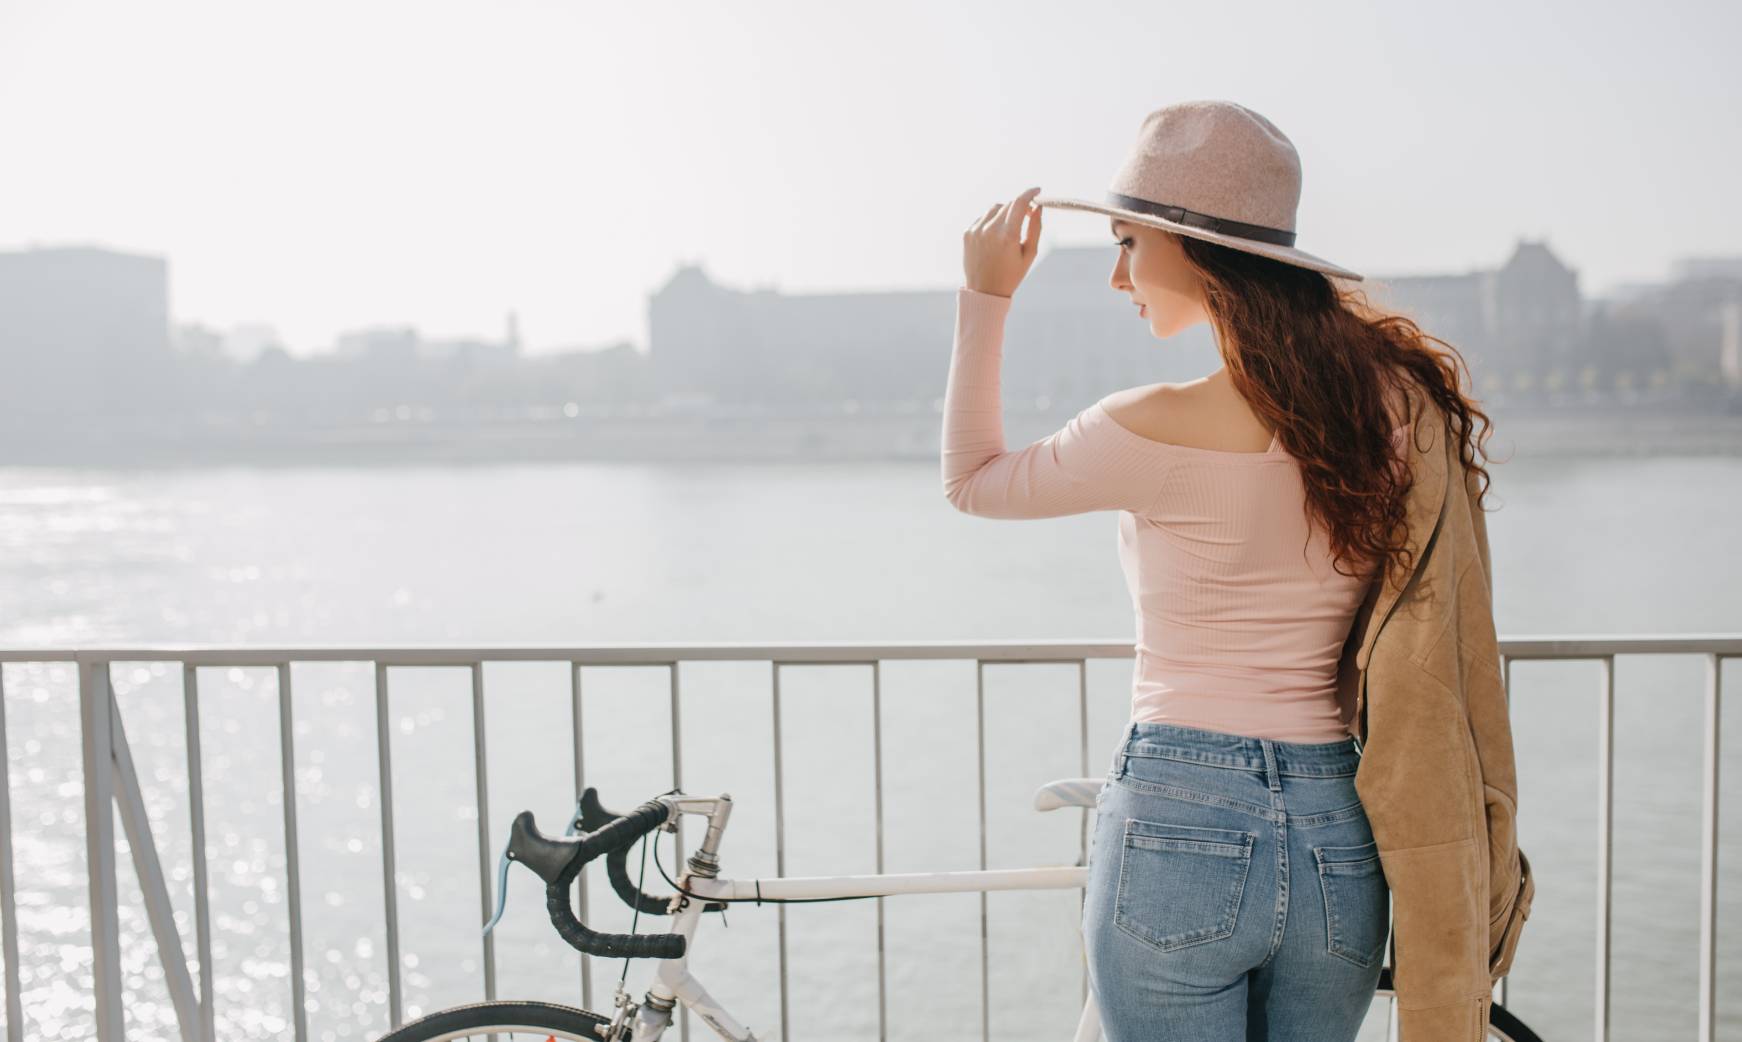 A city girl with white hat and back view